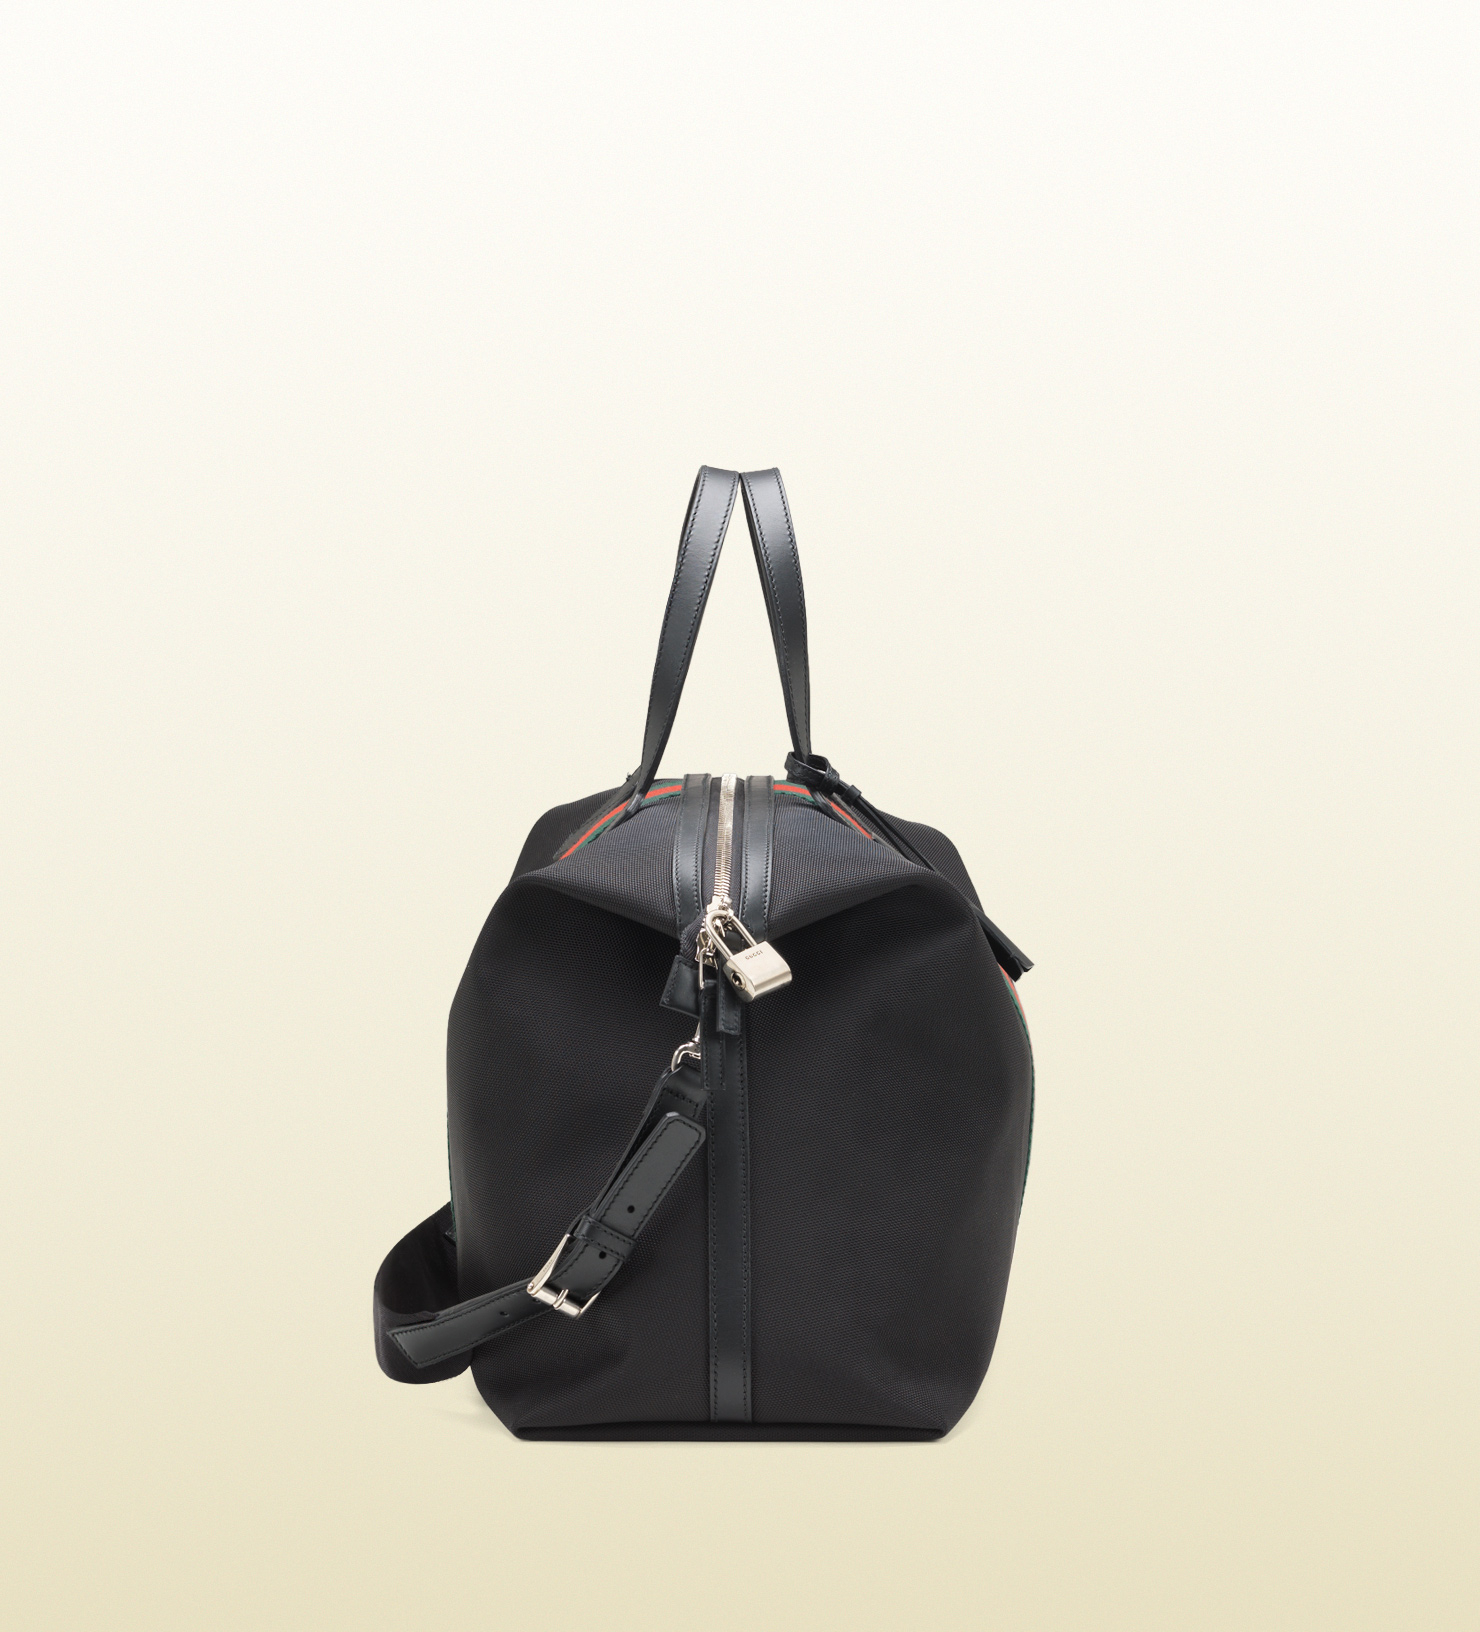 Lyst - Gucci Techno Canvas Duffle Carry-on Bag in Black for Men